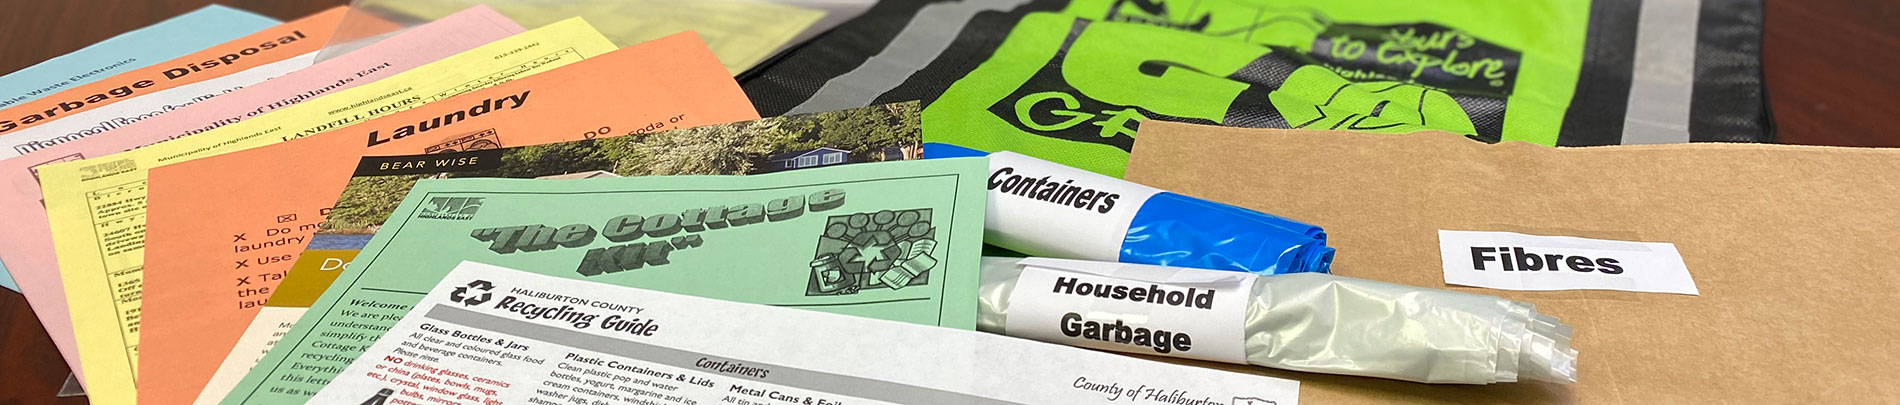 Contents of the Cottage Kit spread out on a table include garbage bags and various guides.